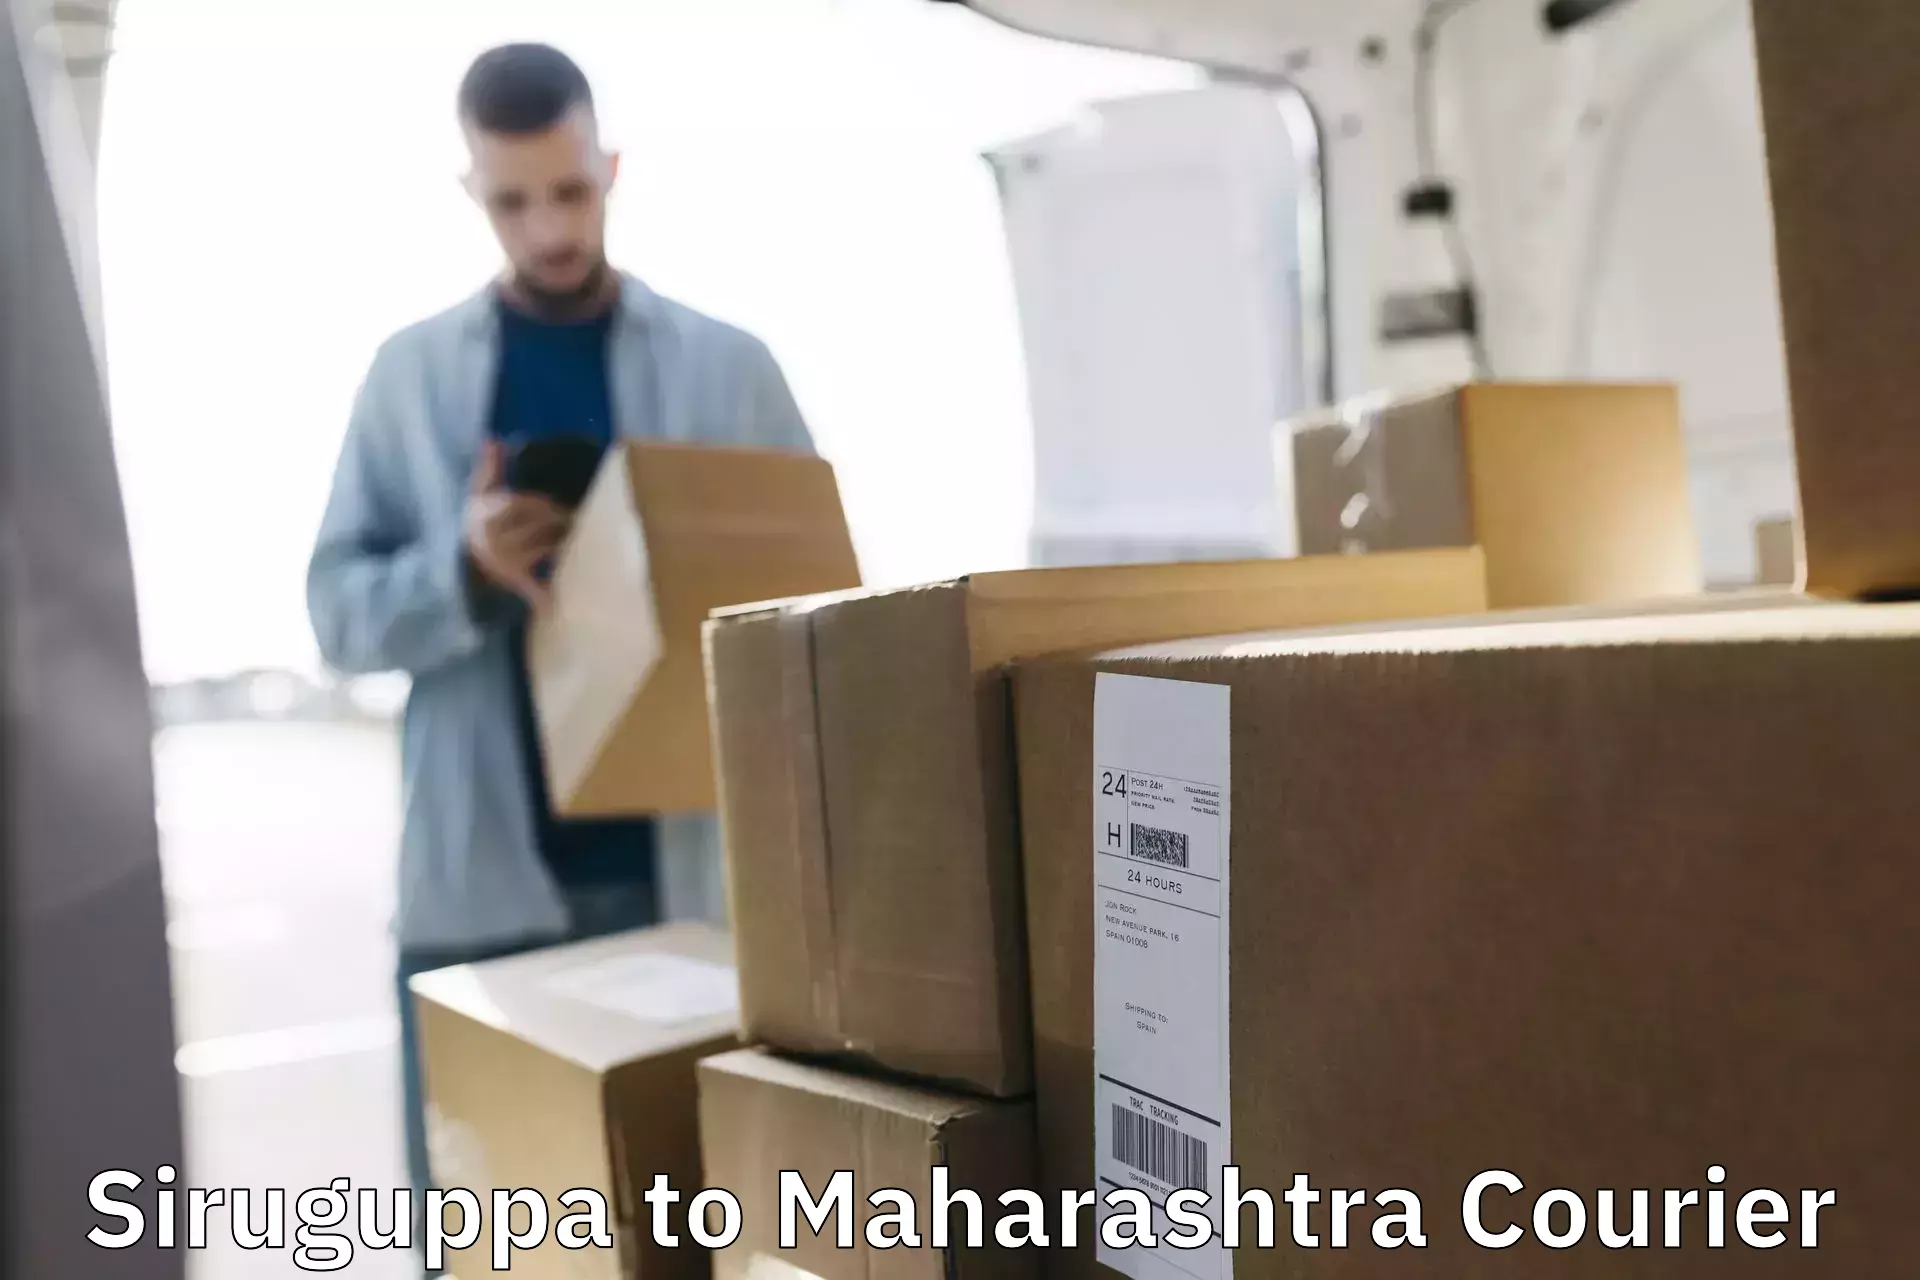 Multi-national courier services Siruguppa to Shrirampur